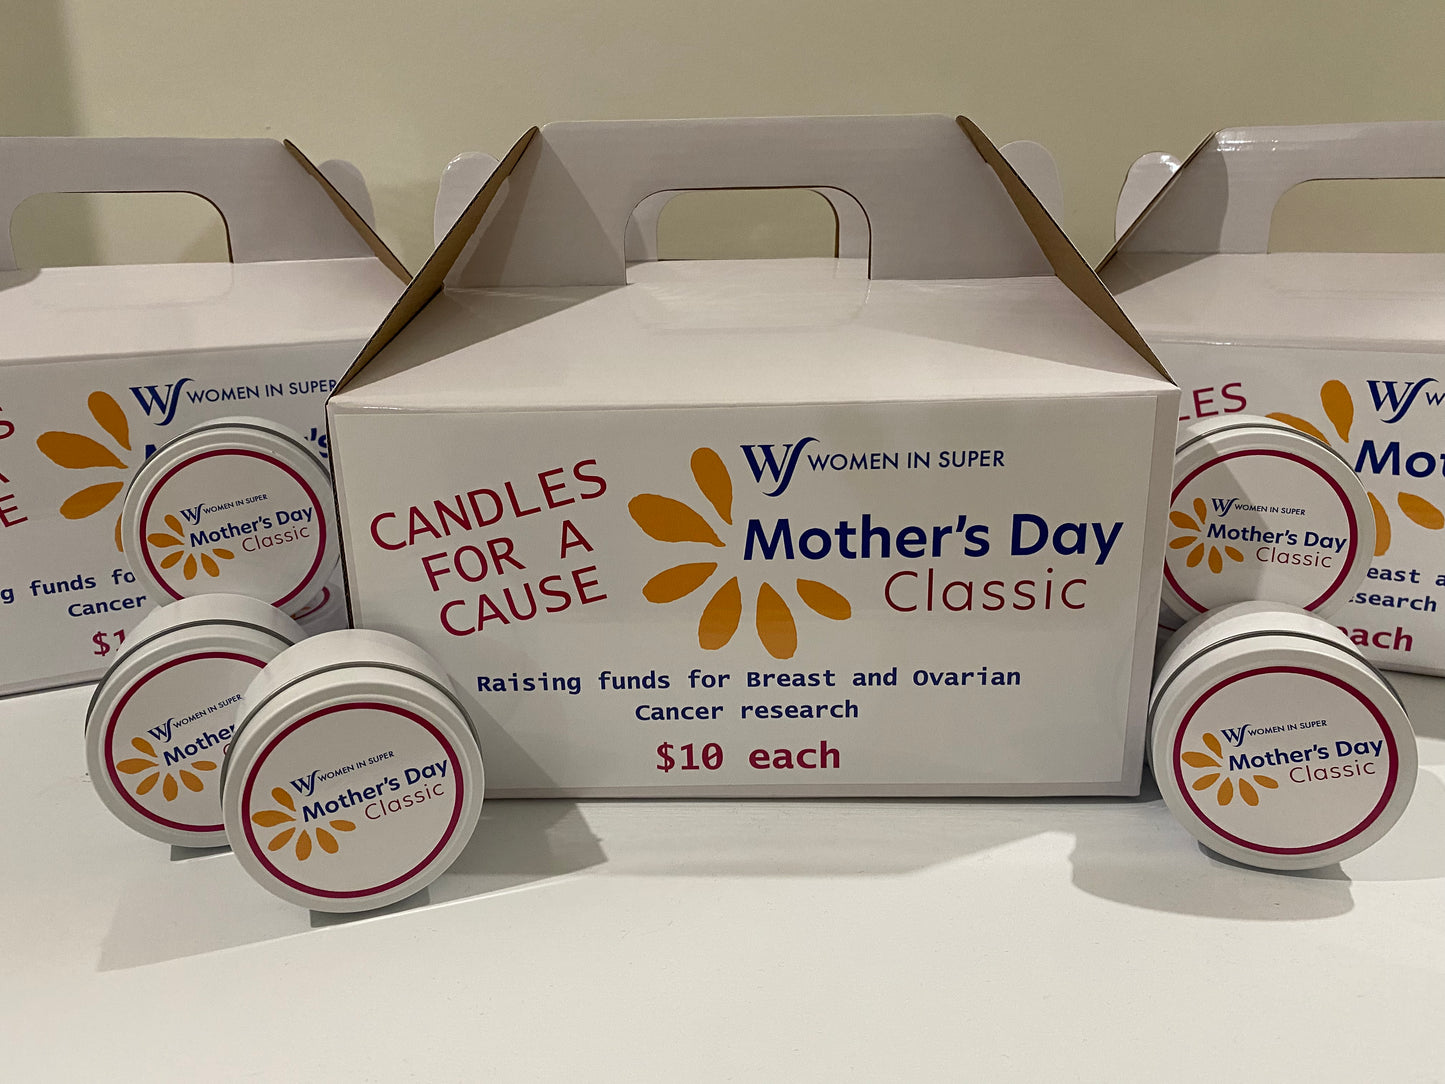 Candles for a Cause Fundraiser Box - Custom